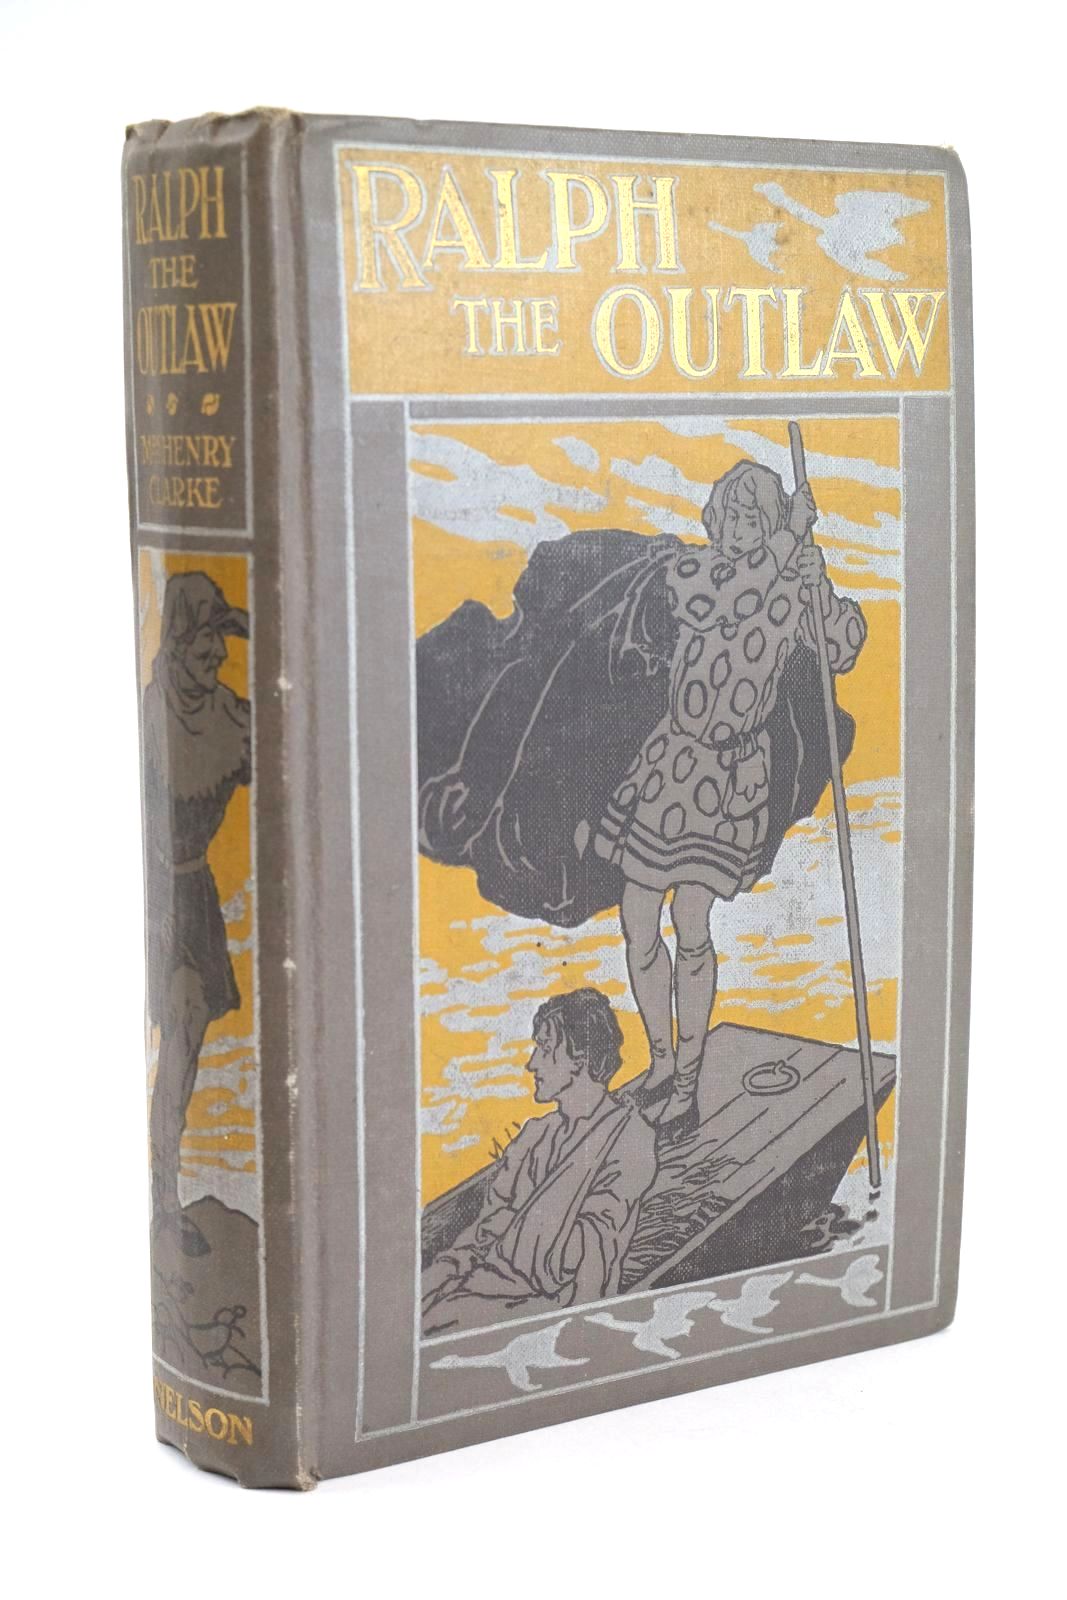 Photo of RALPH THE OUTLAW written by Clarke, Mrs. Henry published by Thomas Nelson & Sons (STOCK CODE: 1324591)  for sale by Stella & Rose's Books